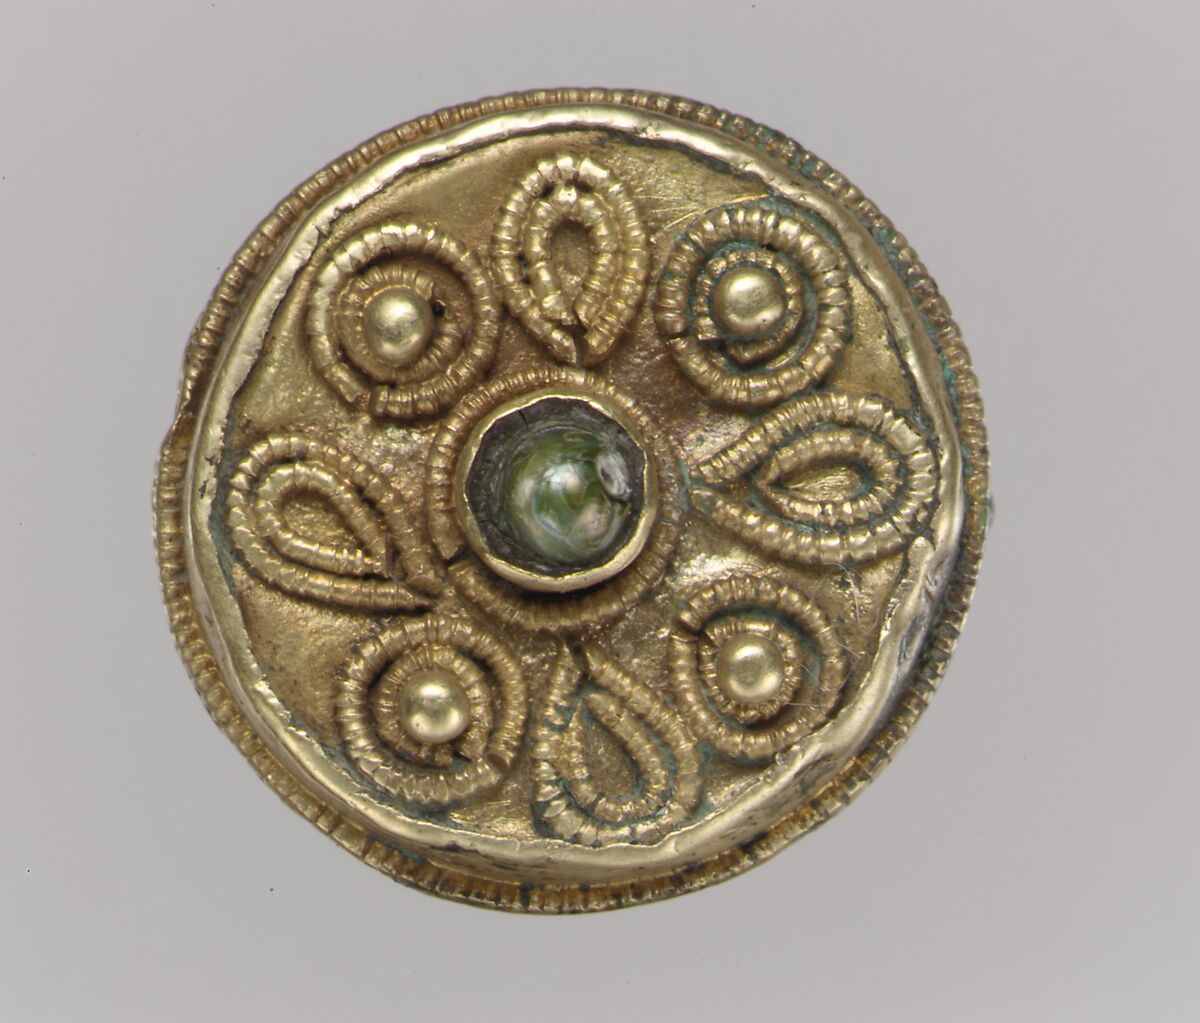 Disk Brooch, Gold, wire, paste cabochons, Frankish 